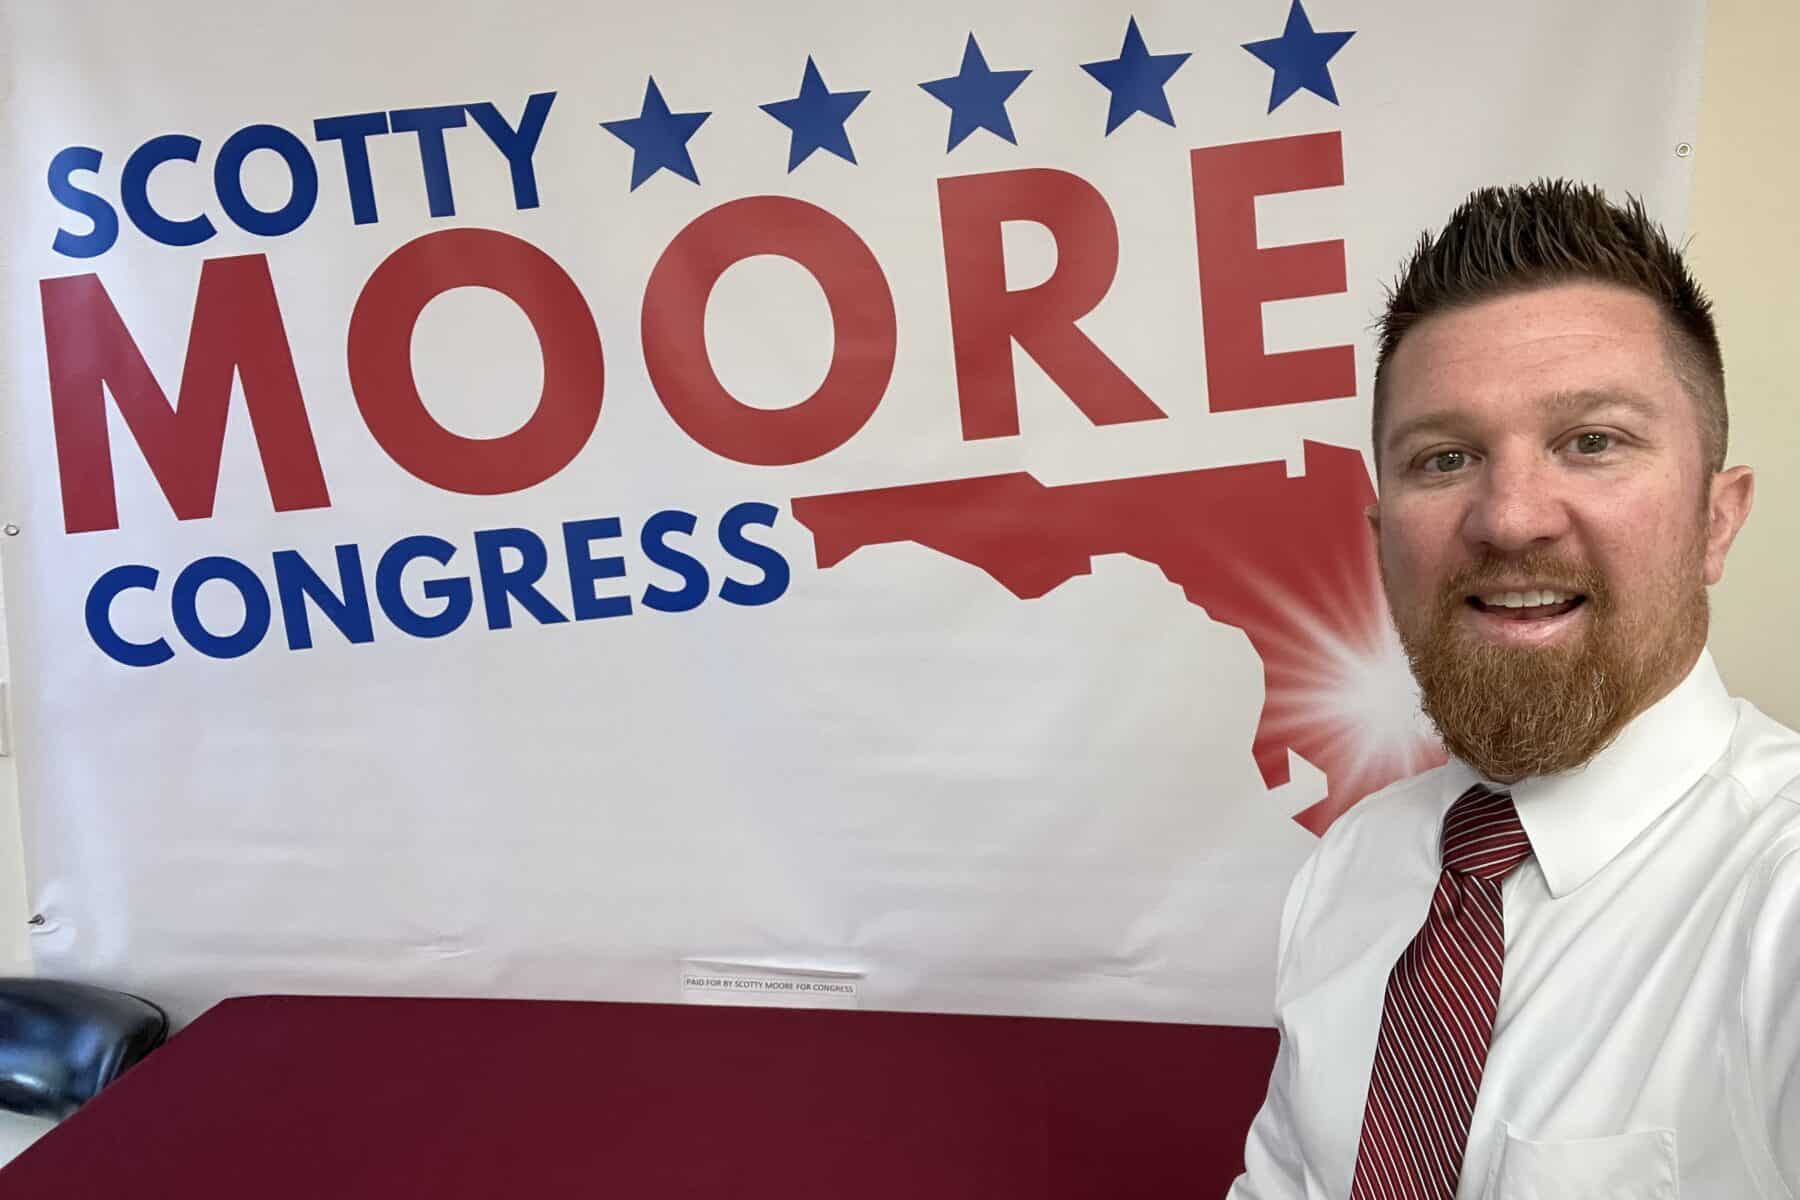 Former Republican congressional candidate Scotty Moore. (Photo/Scotty Moore)